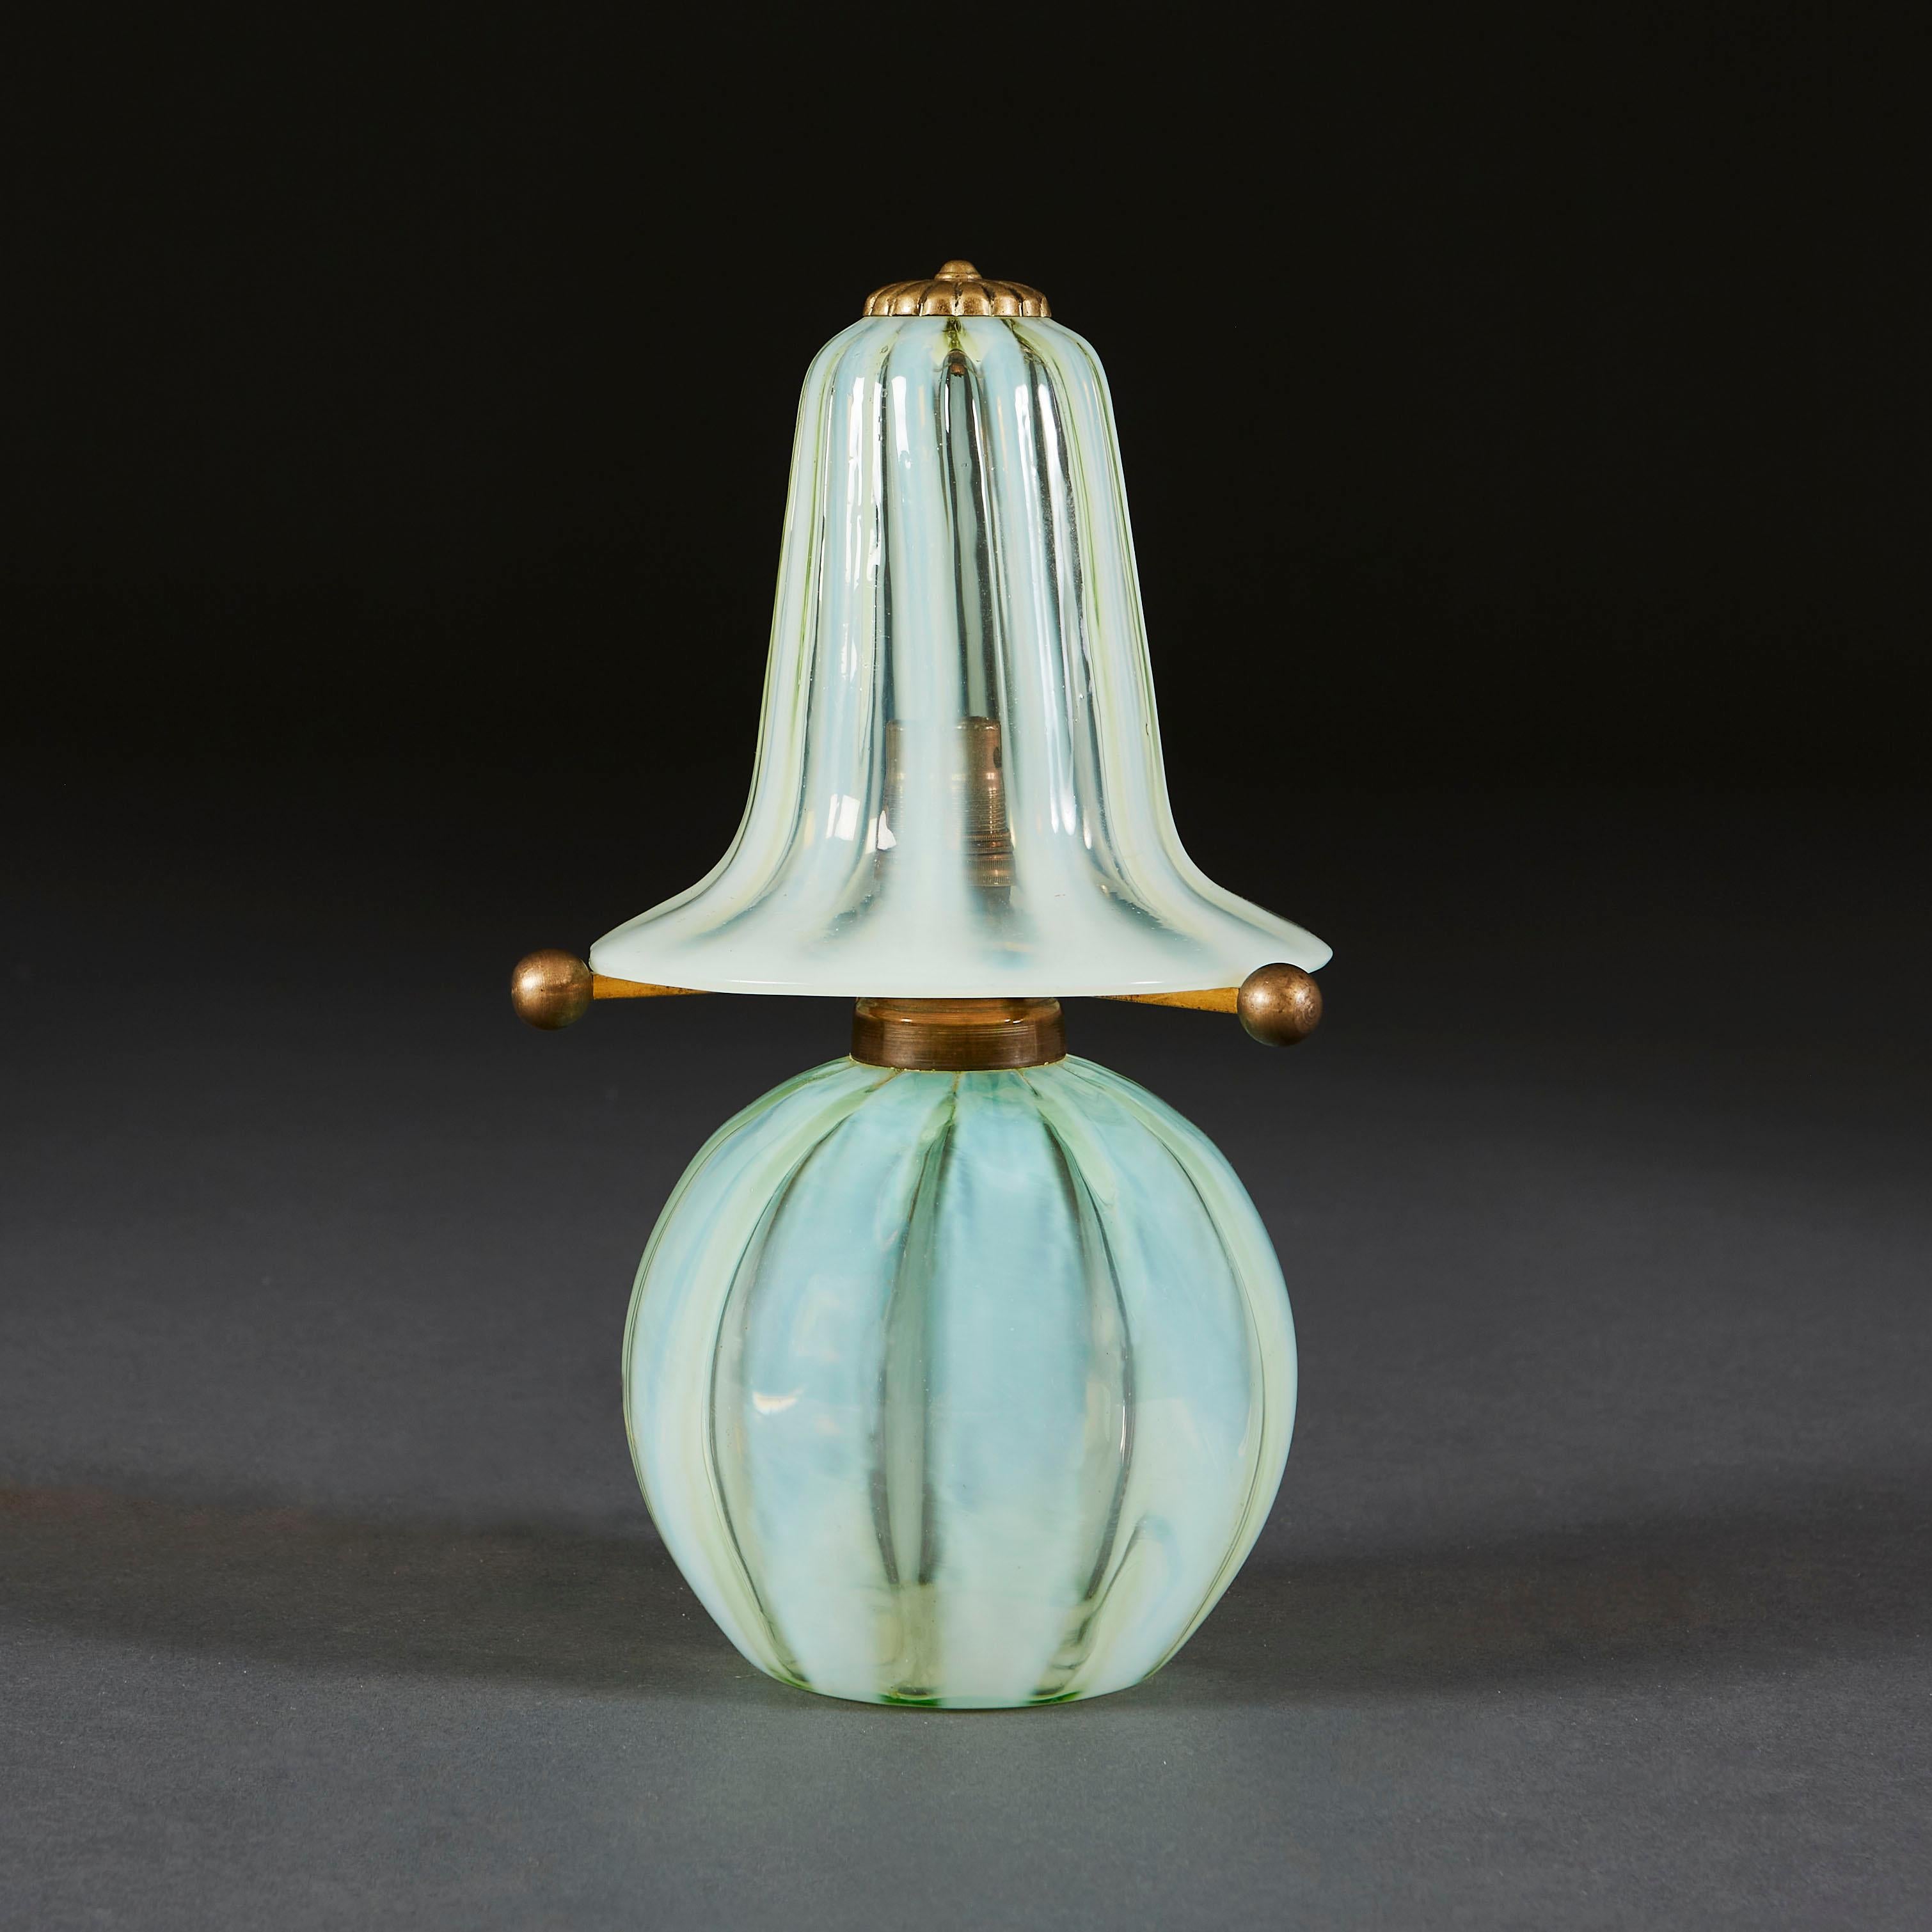 A rare, small opaline glass lamp with a glass shade, all decorated with green and clear glass vertical stripes. The shade supported by three brass arms terminating in brass spheres.

Currently wired for the UK.